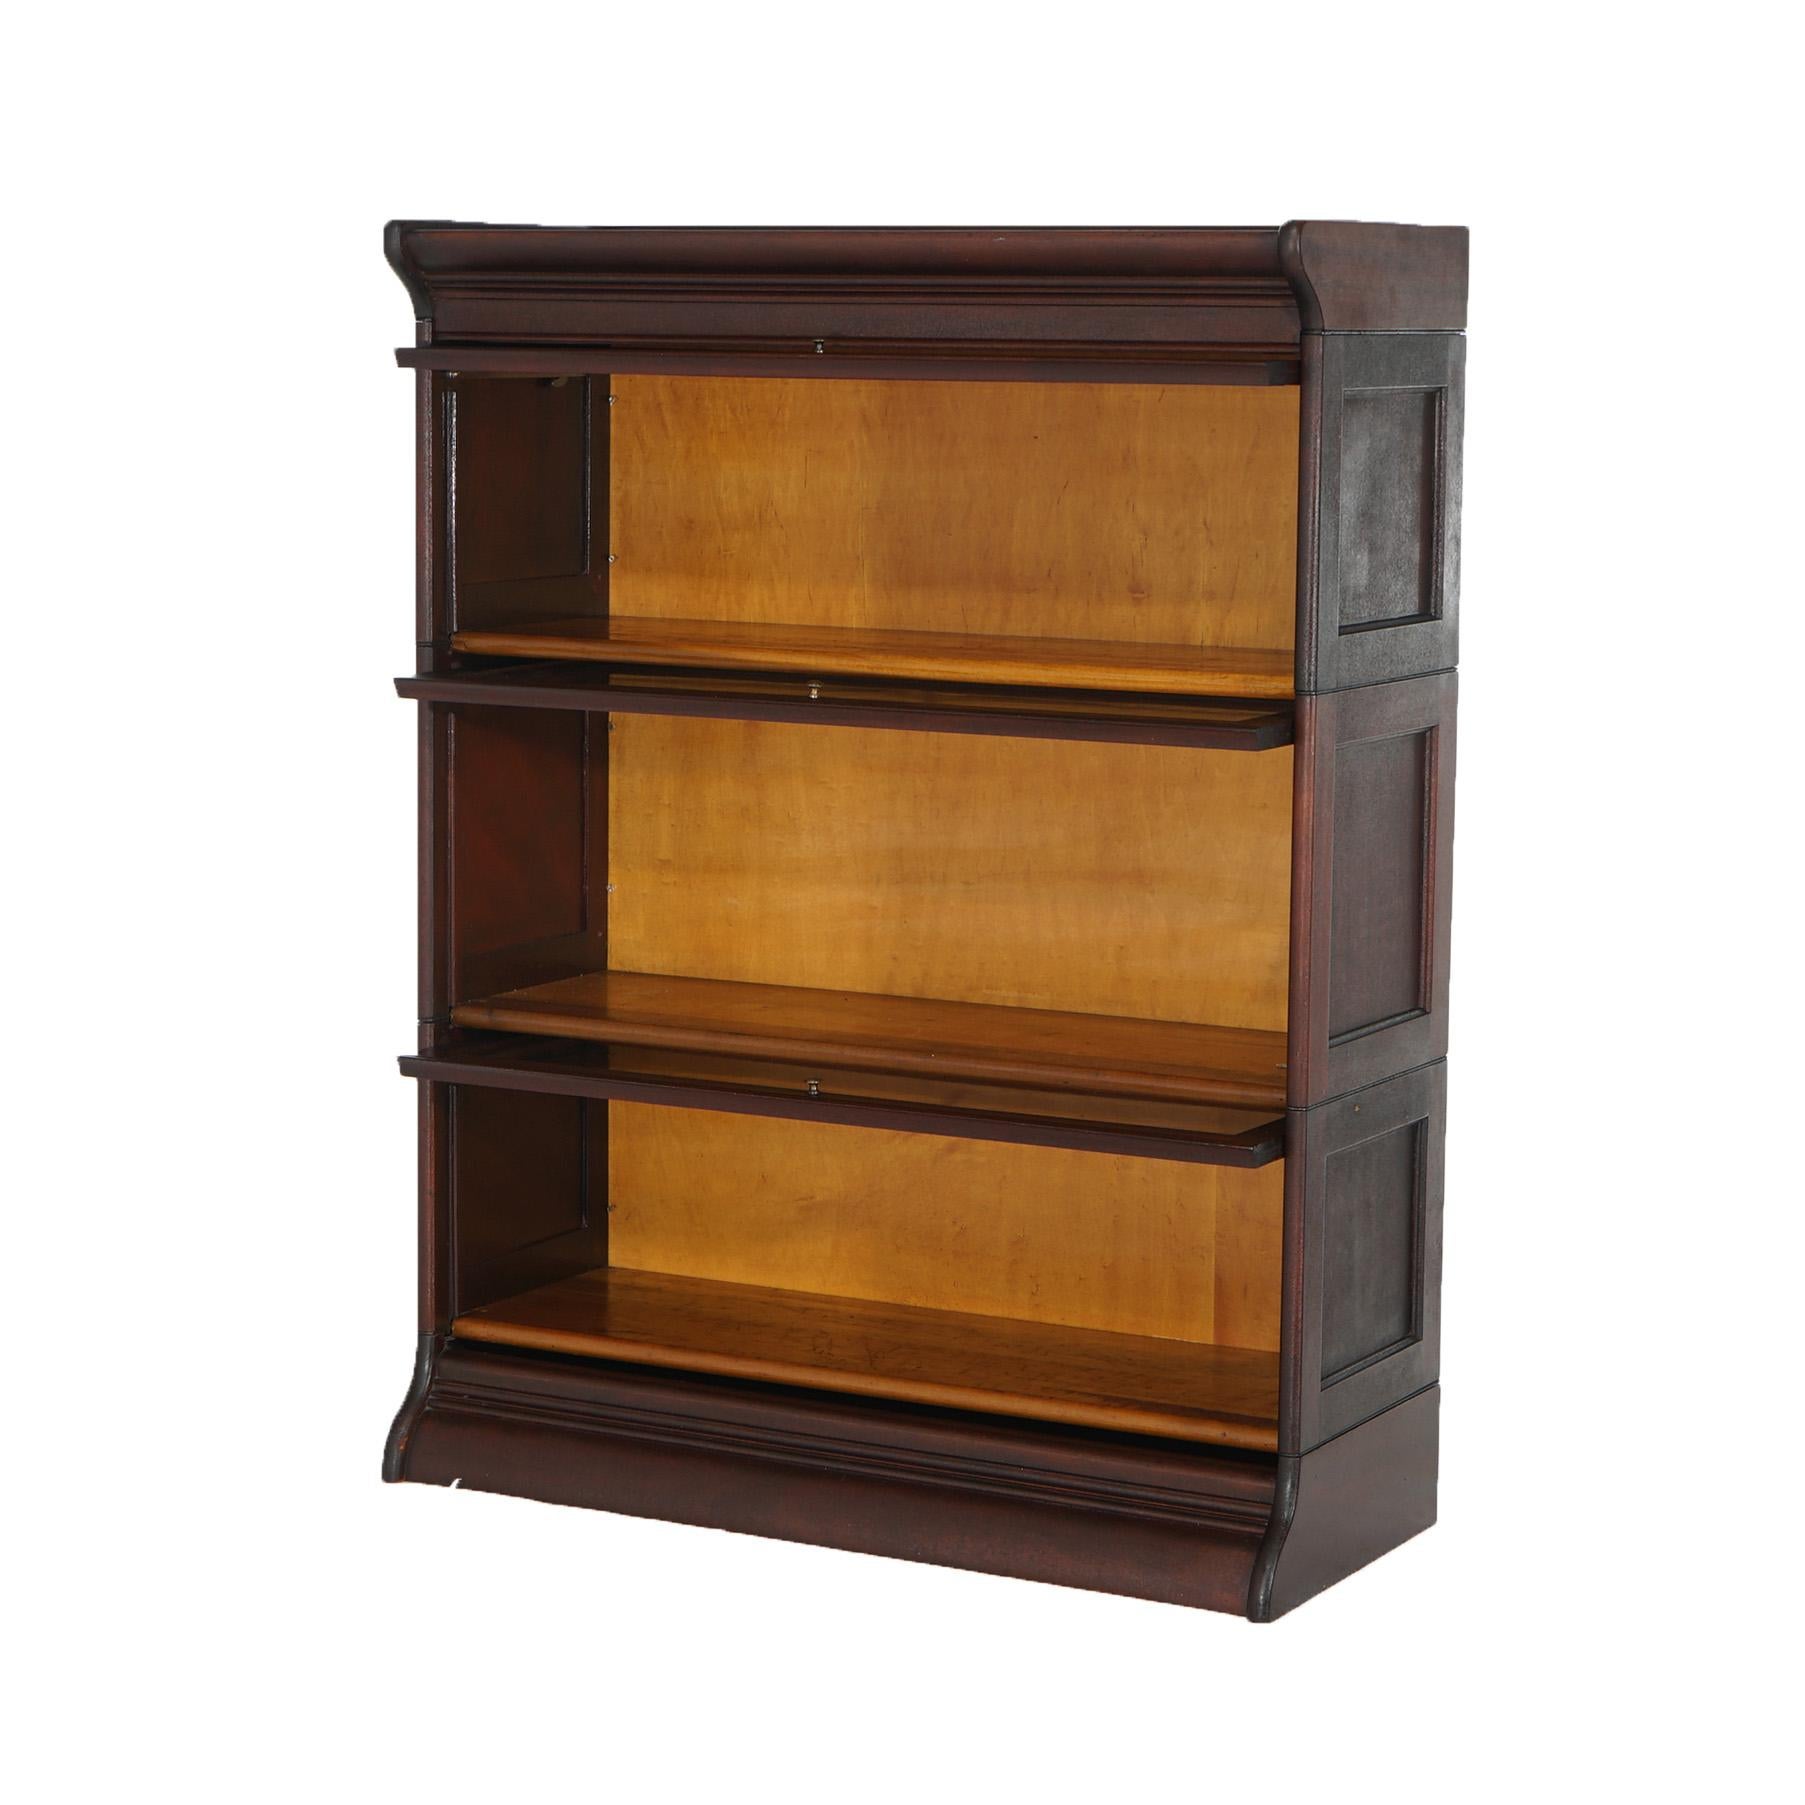 An antique Arts and Crafts 76624 barrister bookcase offers paneled oak construction with three stacks, each having pullout glass doors and raised on ogee base, c1930

Measures- overall 43''H x 33.75''W x 12.5''D; shelves 9.25''H x 31.75''W x 8.25''D